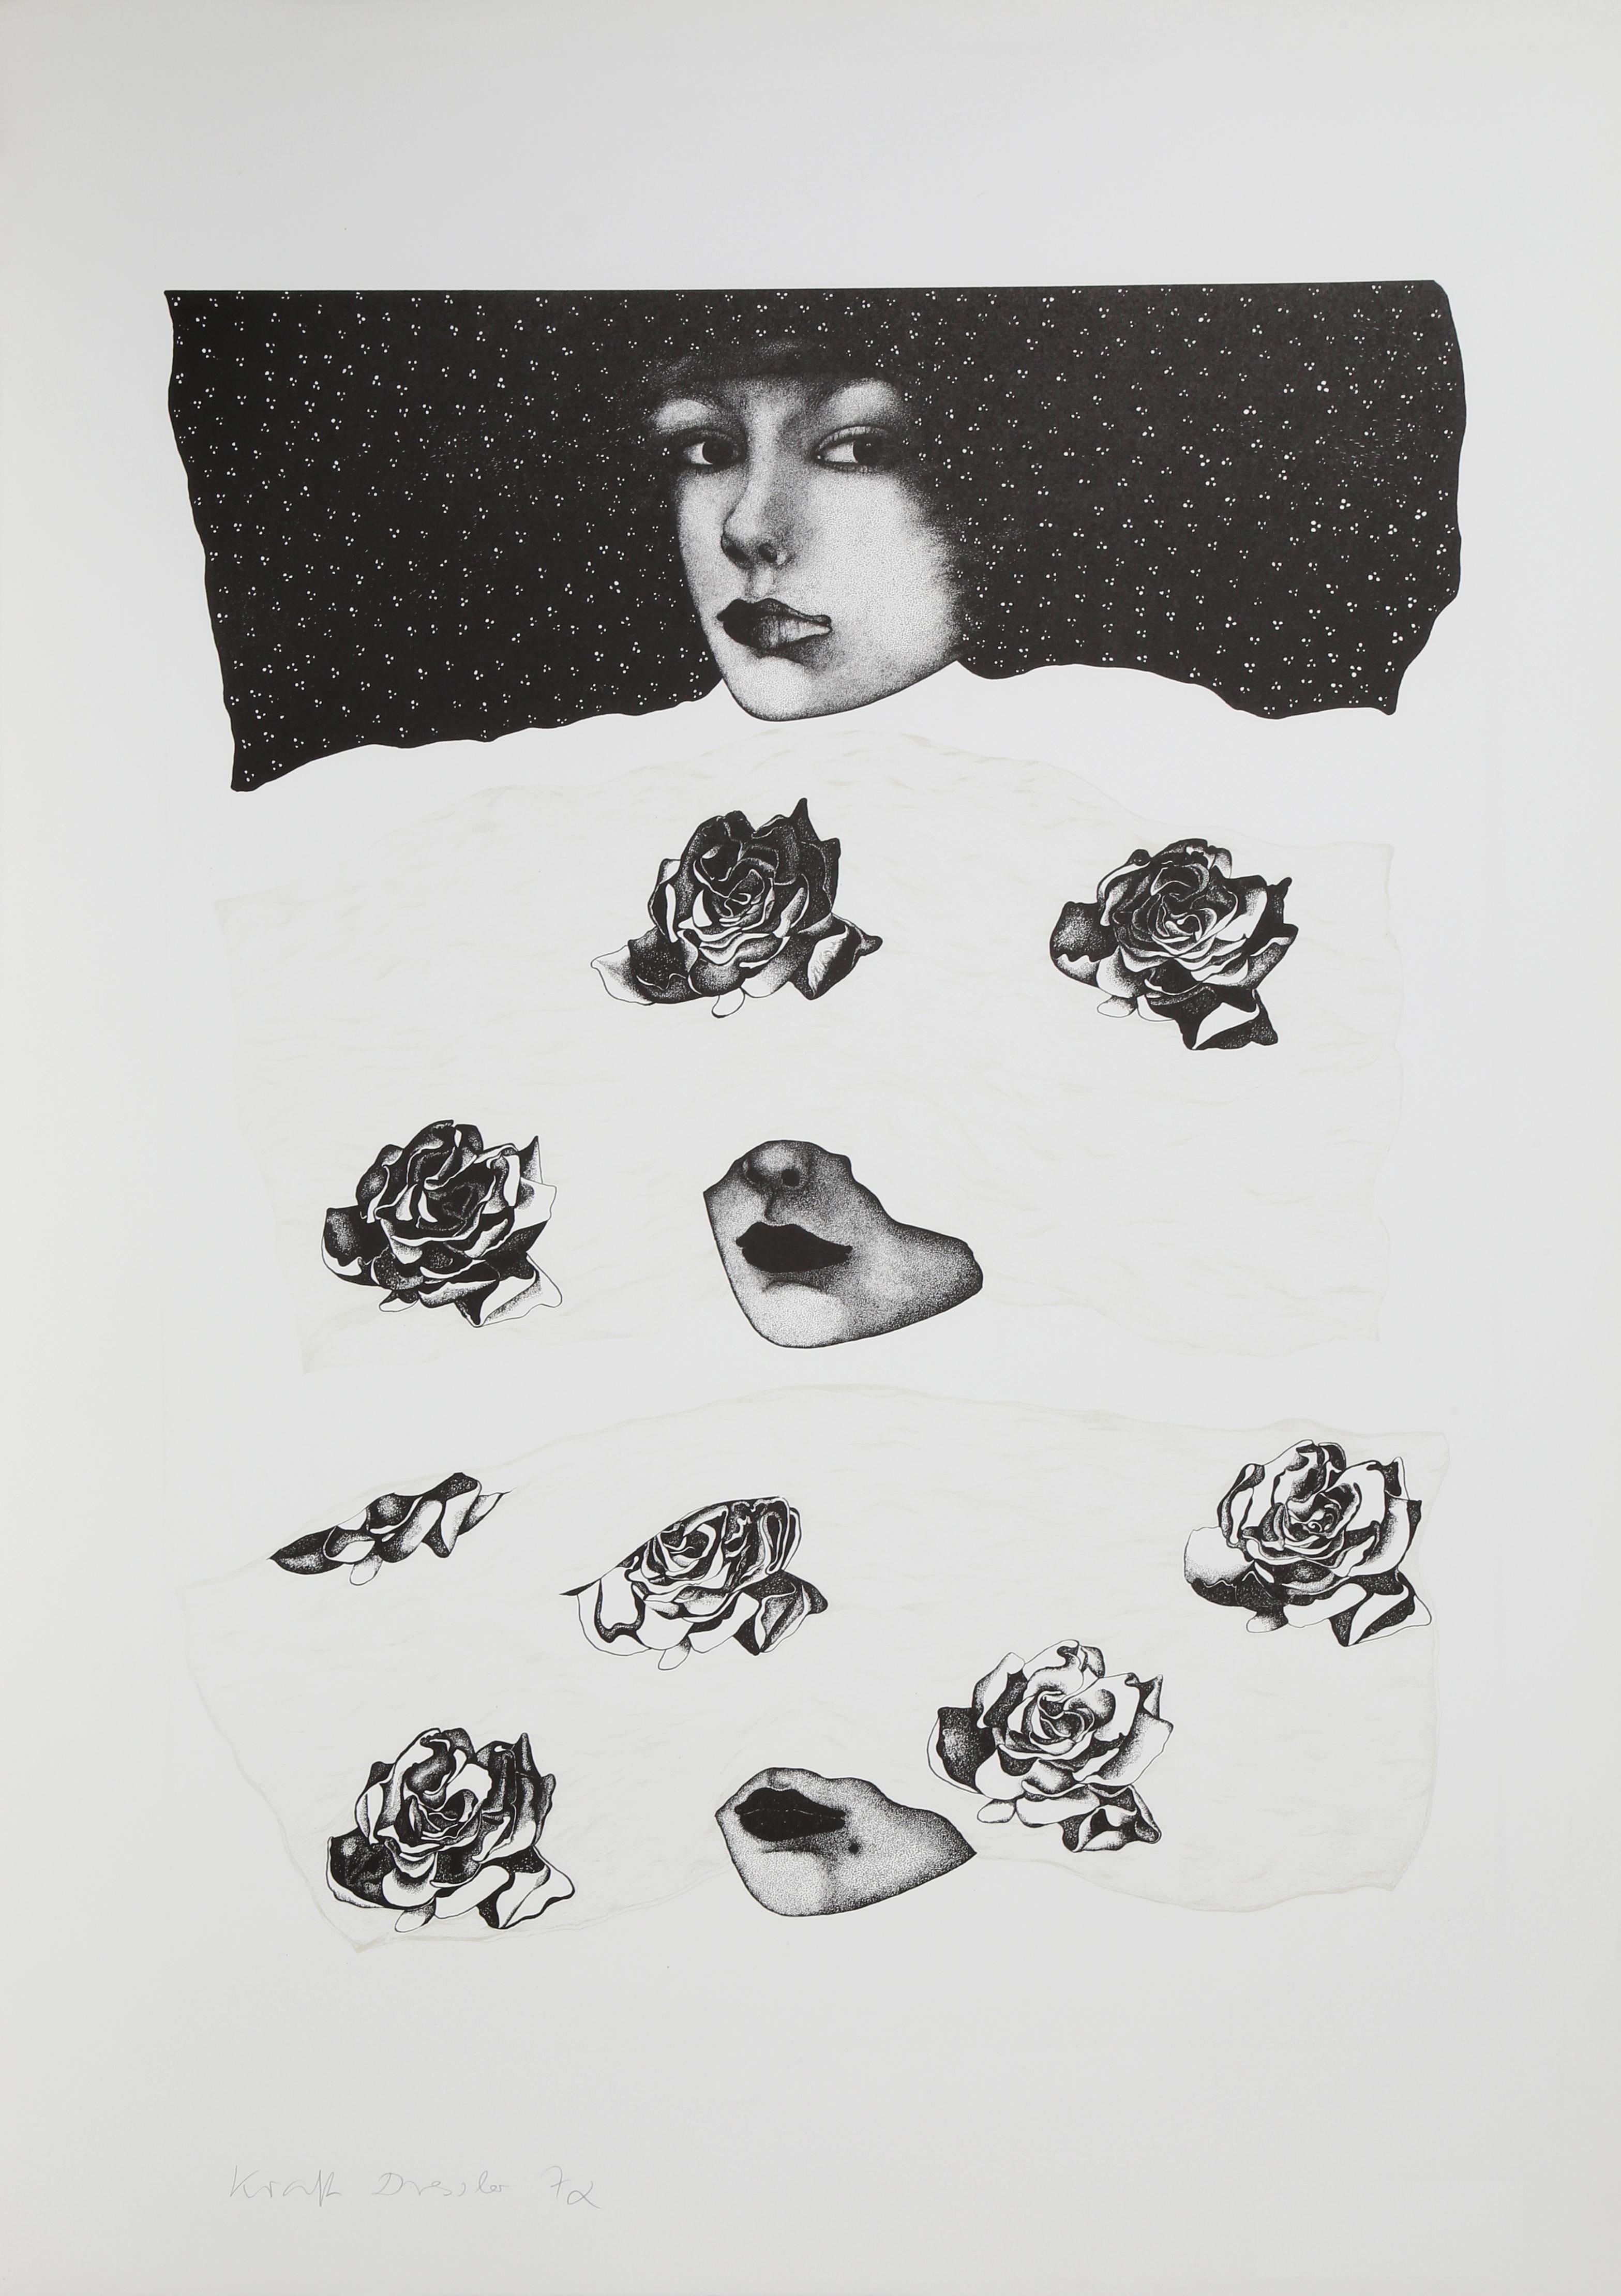 A monotone screenprint by American Pop artist Rosalyn Kraft Drexler plays into a bit of Surrealism, with repeating motifs of roses and the lower portion of a woman's face scattered across the composition. This print is signed by the artist in